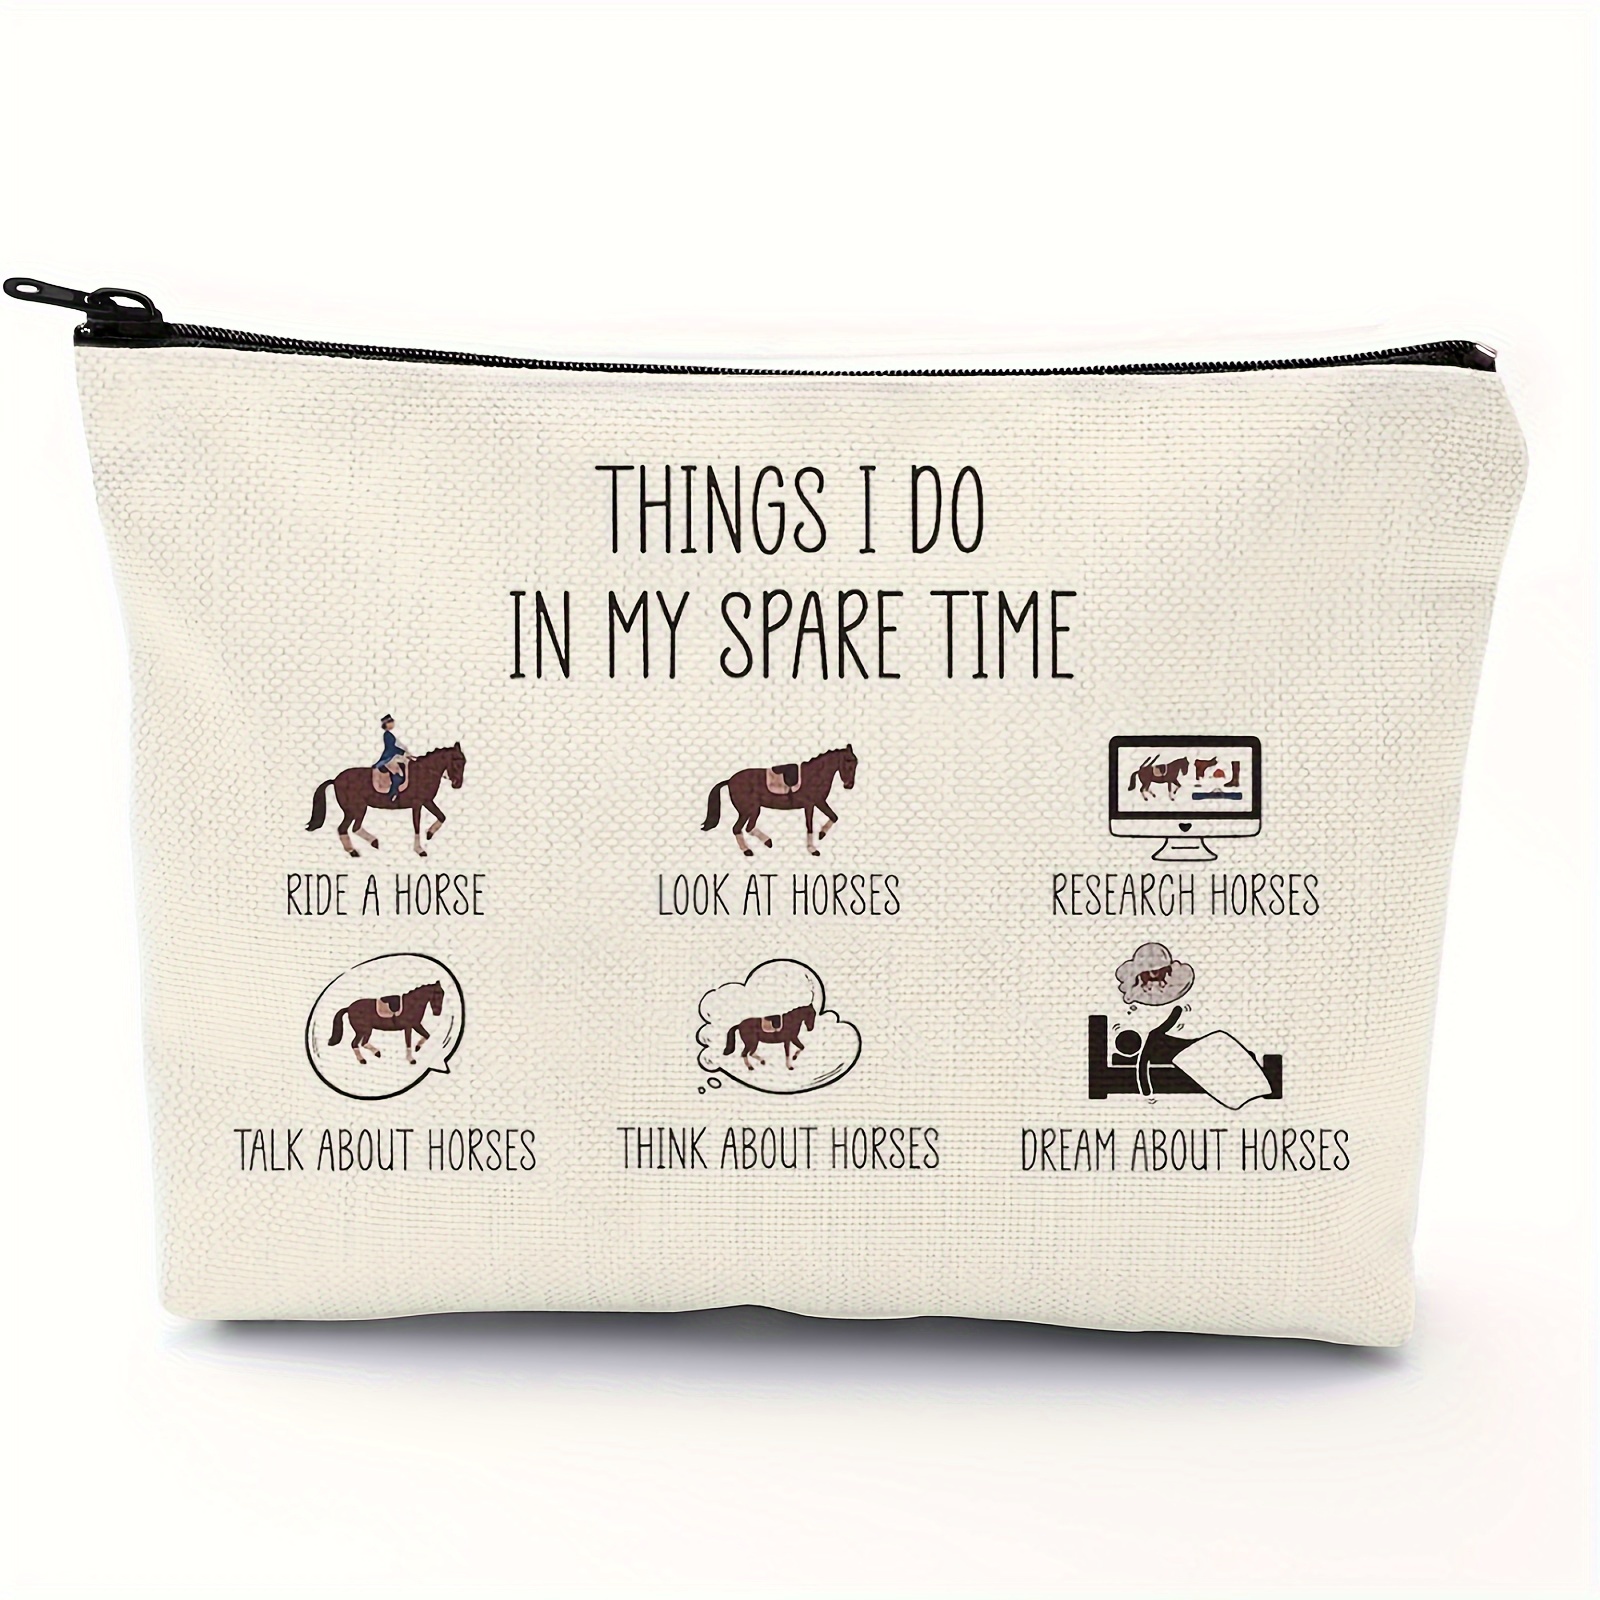 

Horse Gifts For Girls Women For Horse Lovers Equestrian Horse Makeup Bag Large Capacity Zipper Bag - Things I Do In My Spare Time - Mother's Day Cosmetic Bag